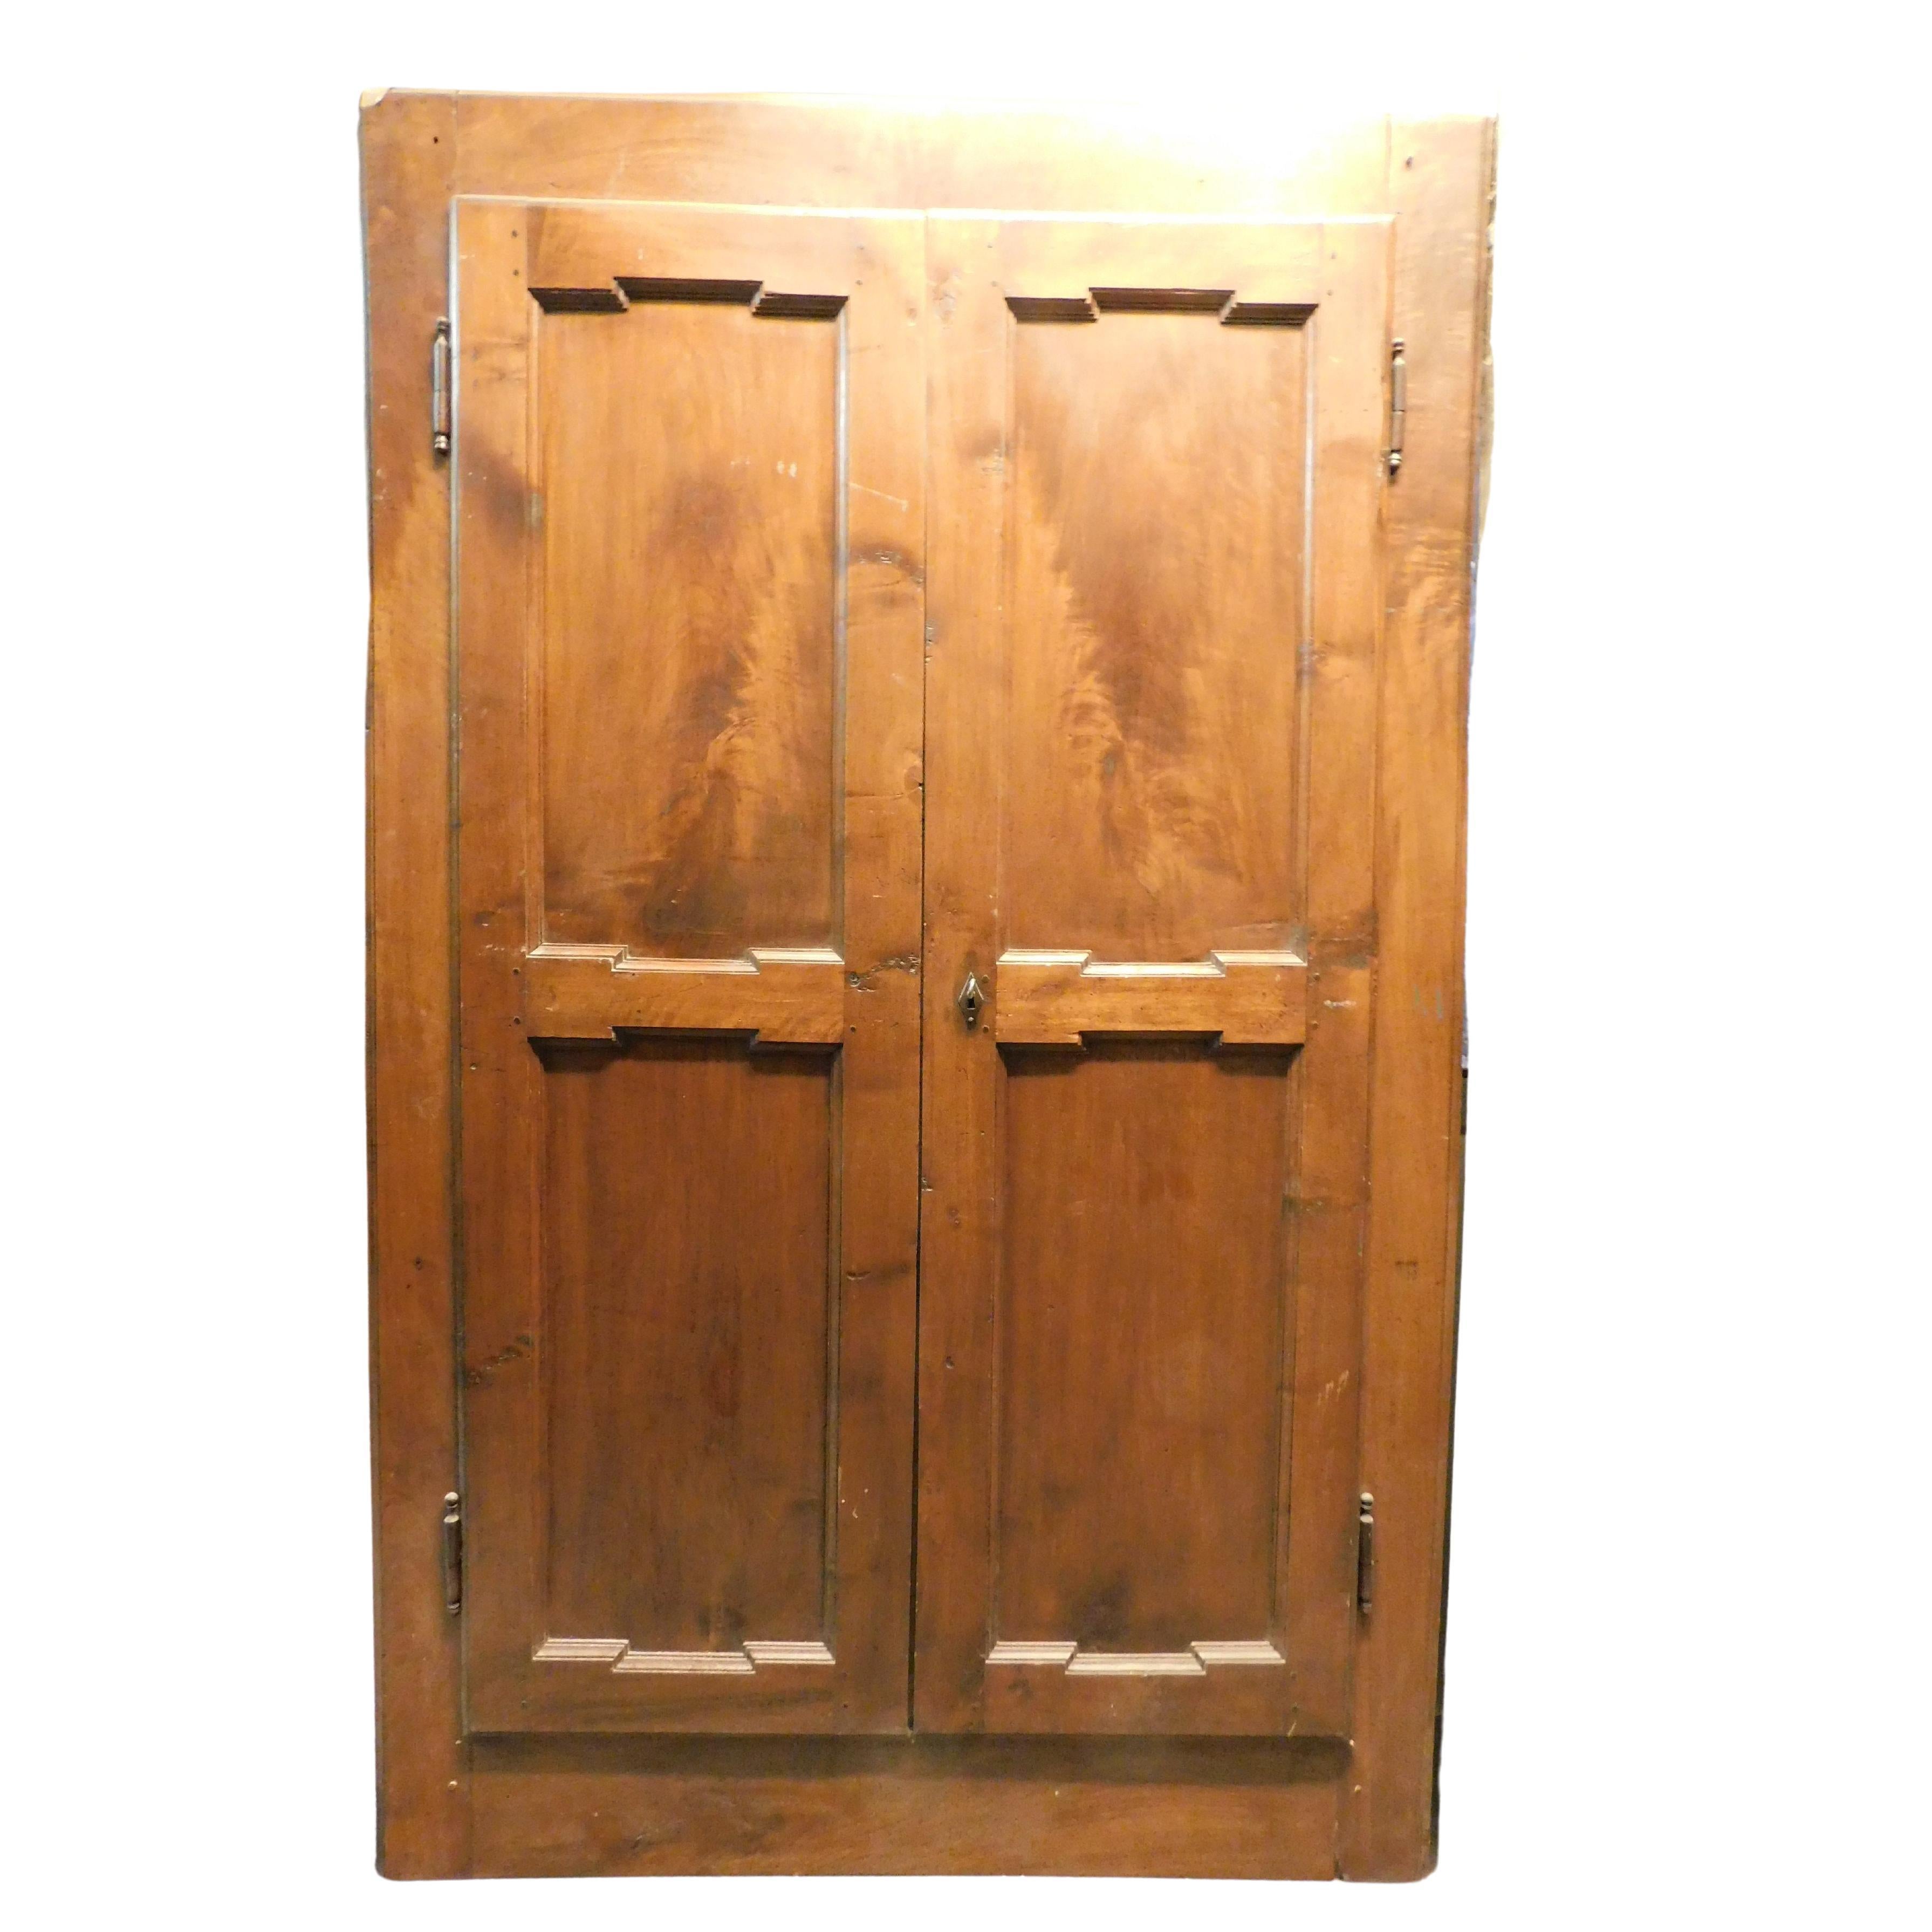 Antique wall cabinet, placard, with two walnut doors, with corrugated panels in the molding, built for a wall wardrobe in a house in Italy, original from the 18th century, it could be transformed into a door by cutting the bar underneath. maximum